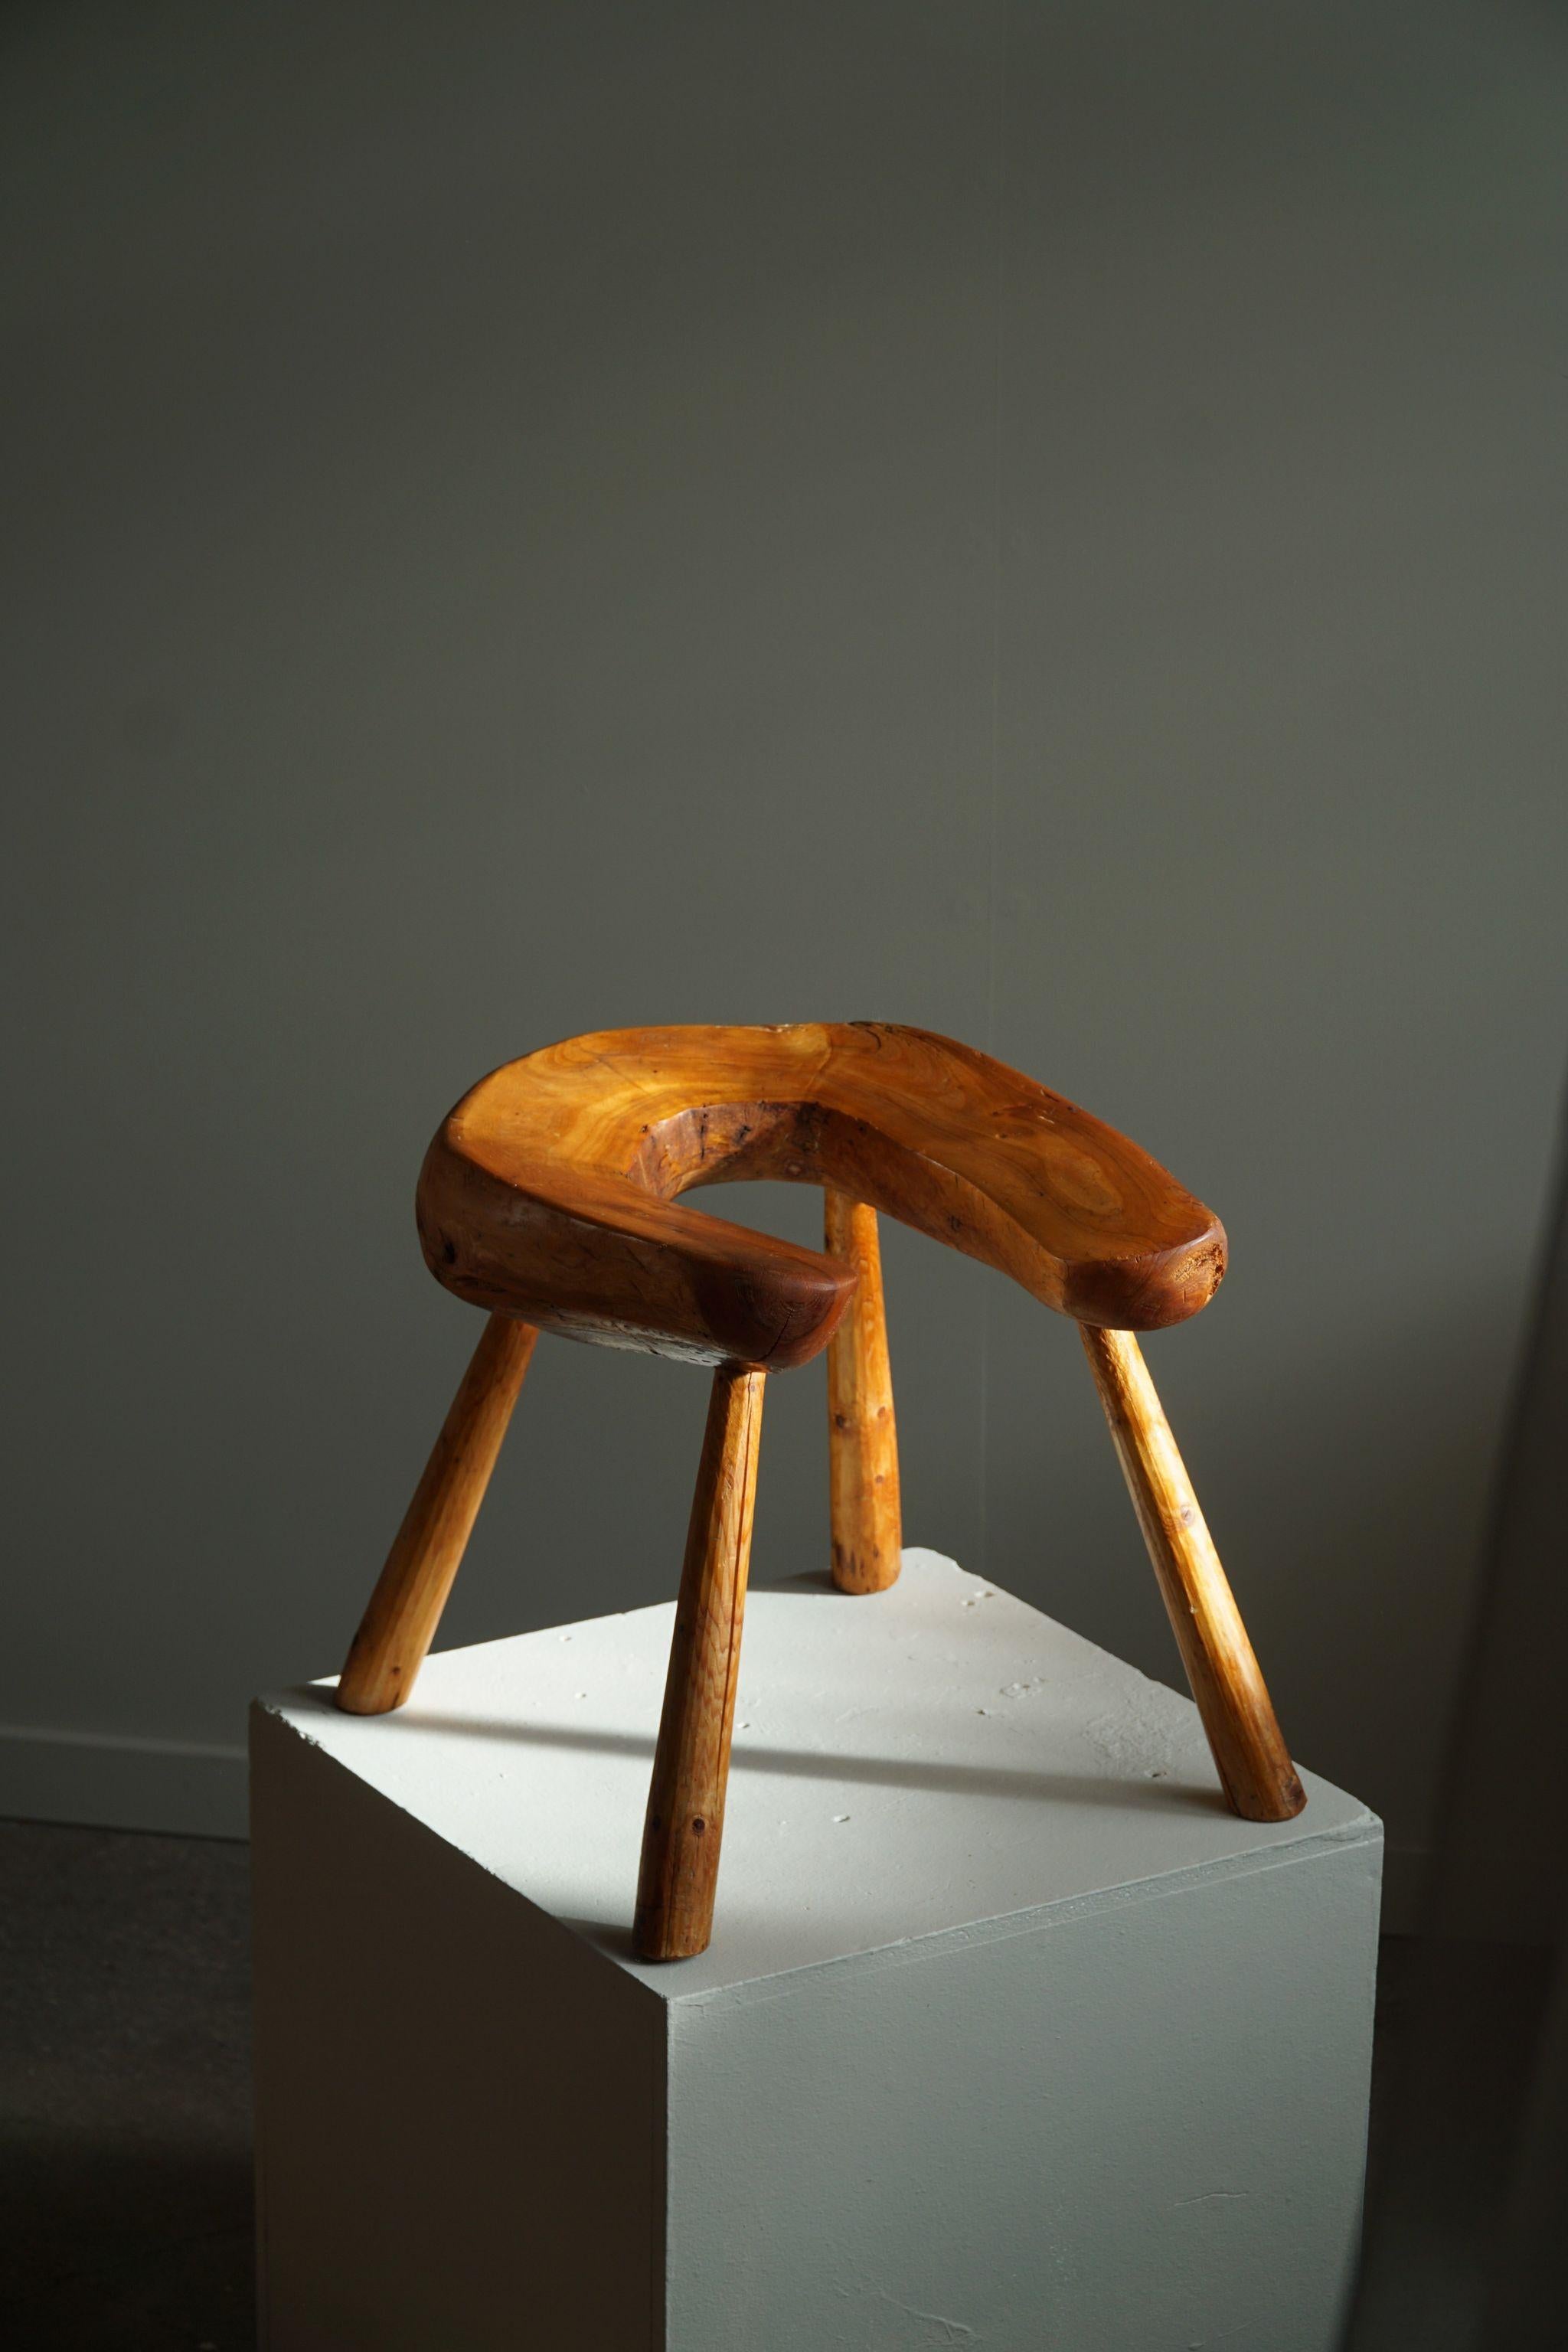 Decorative Scandinavian stool with organic shape in solid pine. Hand carved by a Swedish cabinetmaker in 1950s.

This wabi sabi stool will fit in many types of home decors. Modern, Scandinavian or an Art Deco interior style.

A beautiful vintage